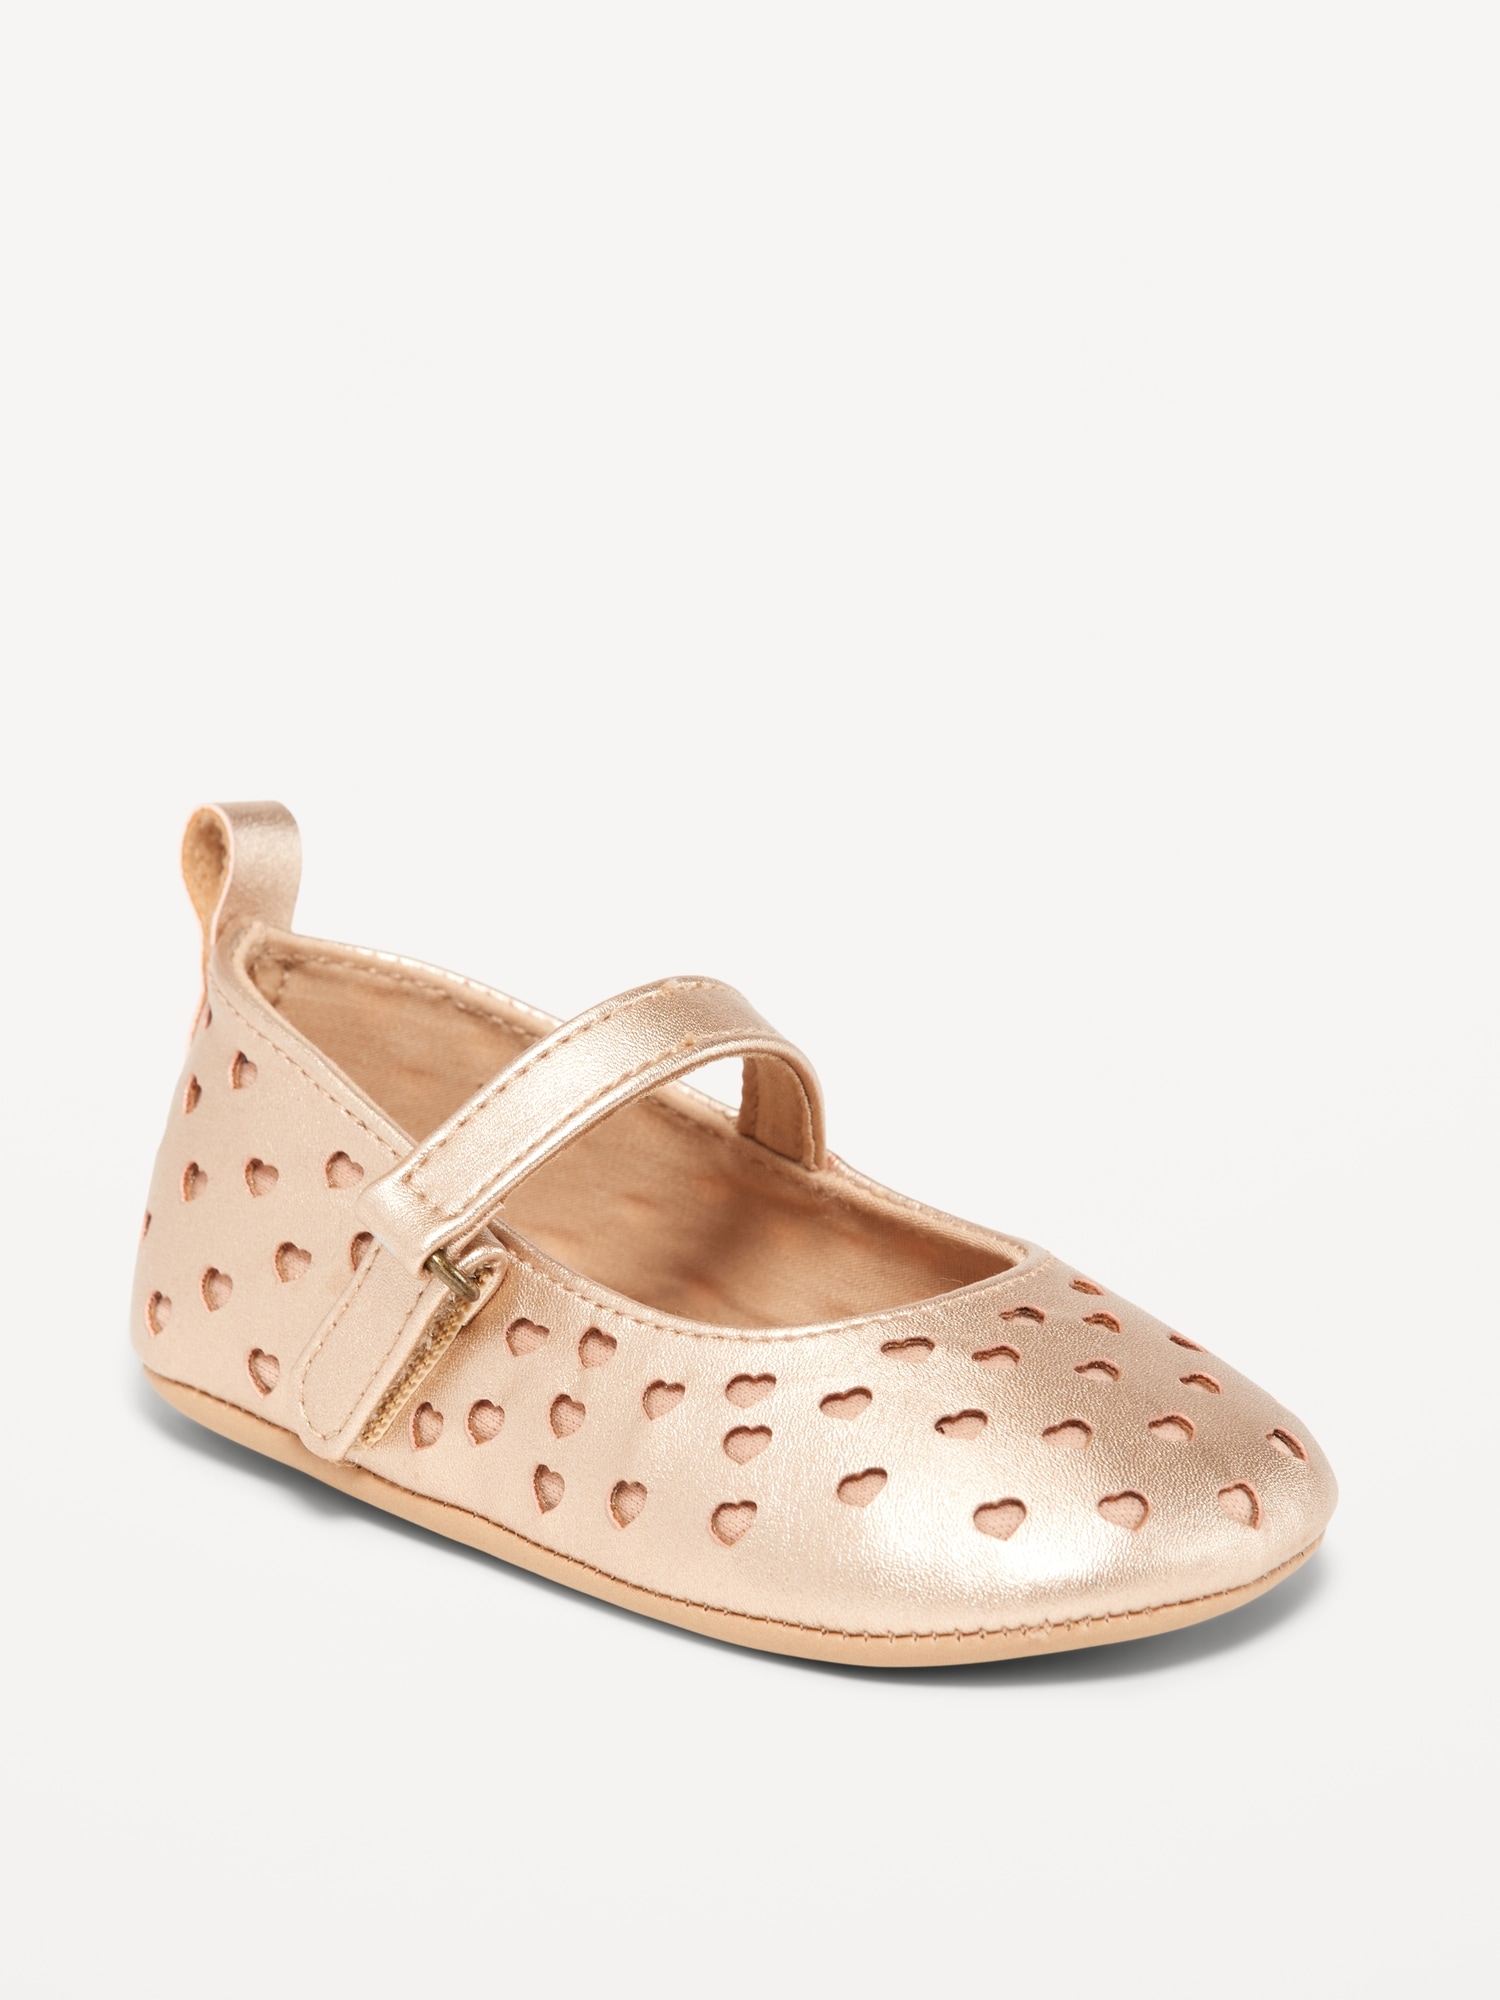 Oldnavy Perforated-Hearts Ballet Flat Shoes for Baby